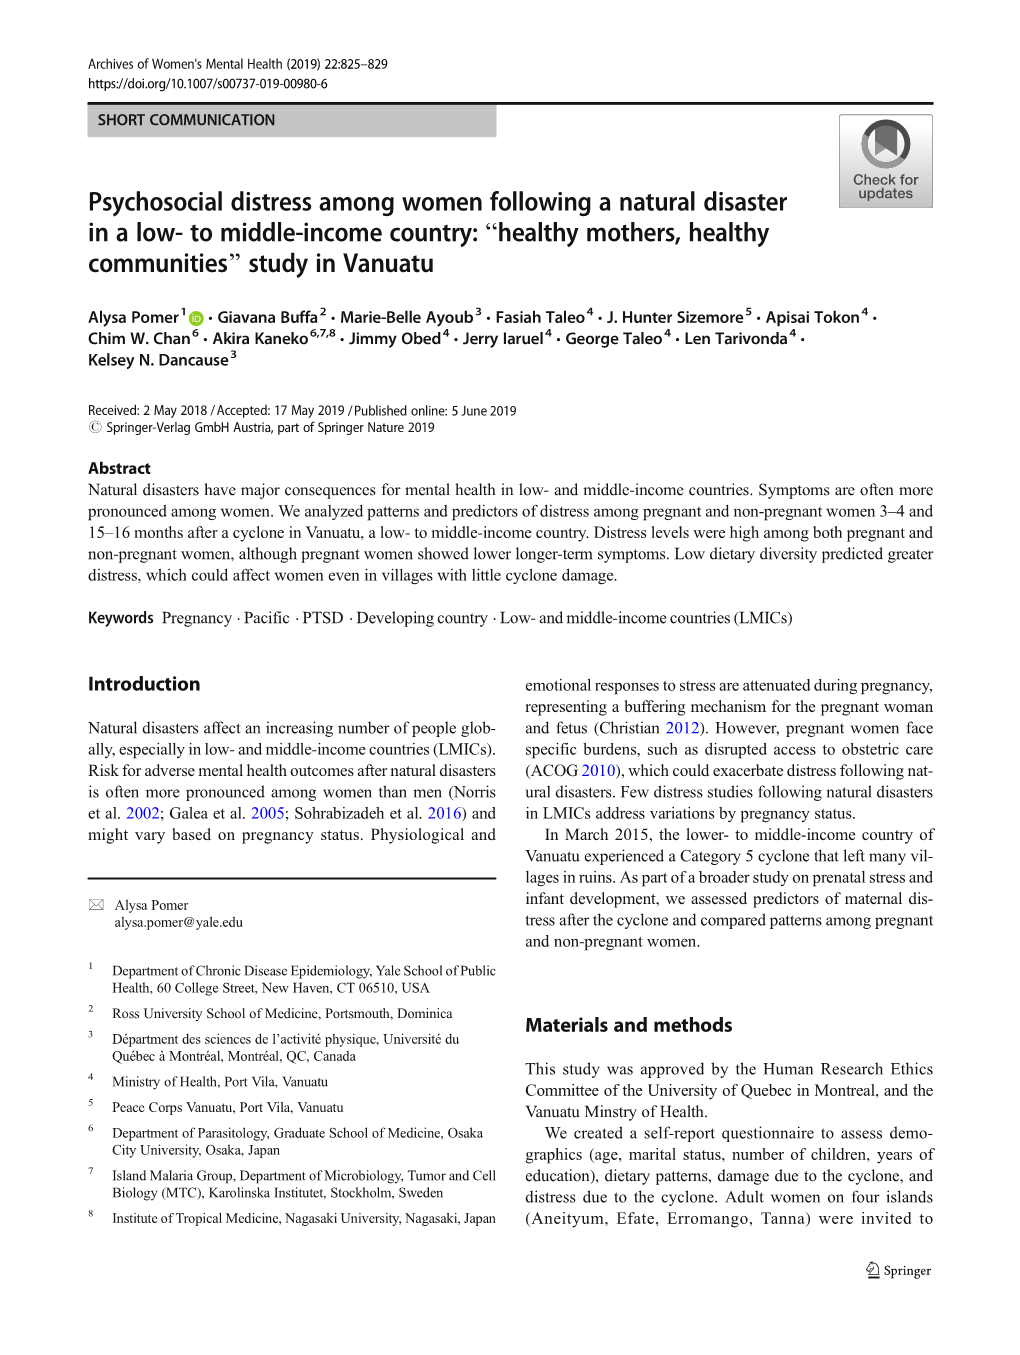 Psychosocial Distress Among Women Following a Natural Disaster in a Low- to Middle-Income Country: Bhealthy Mothers, Healthy Communities^ Study in Vanuatu